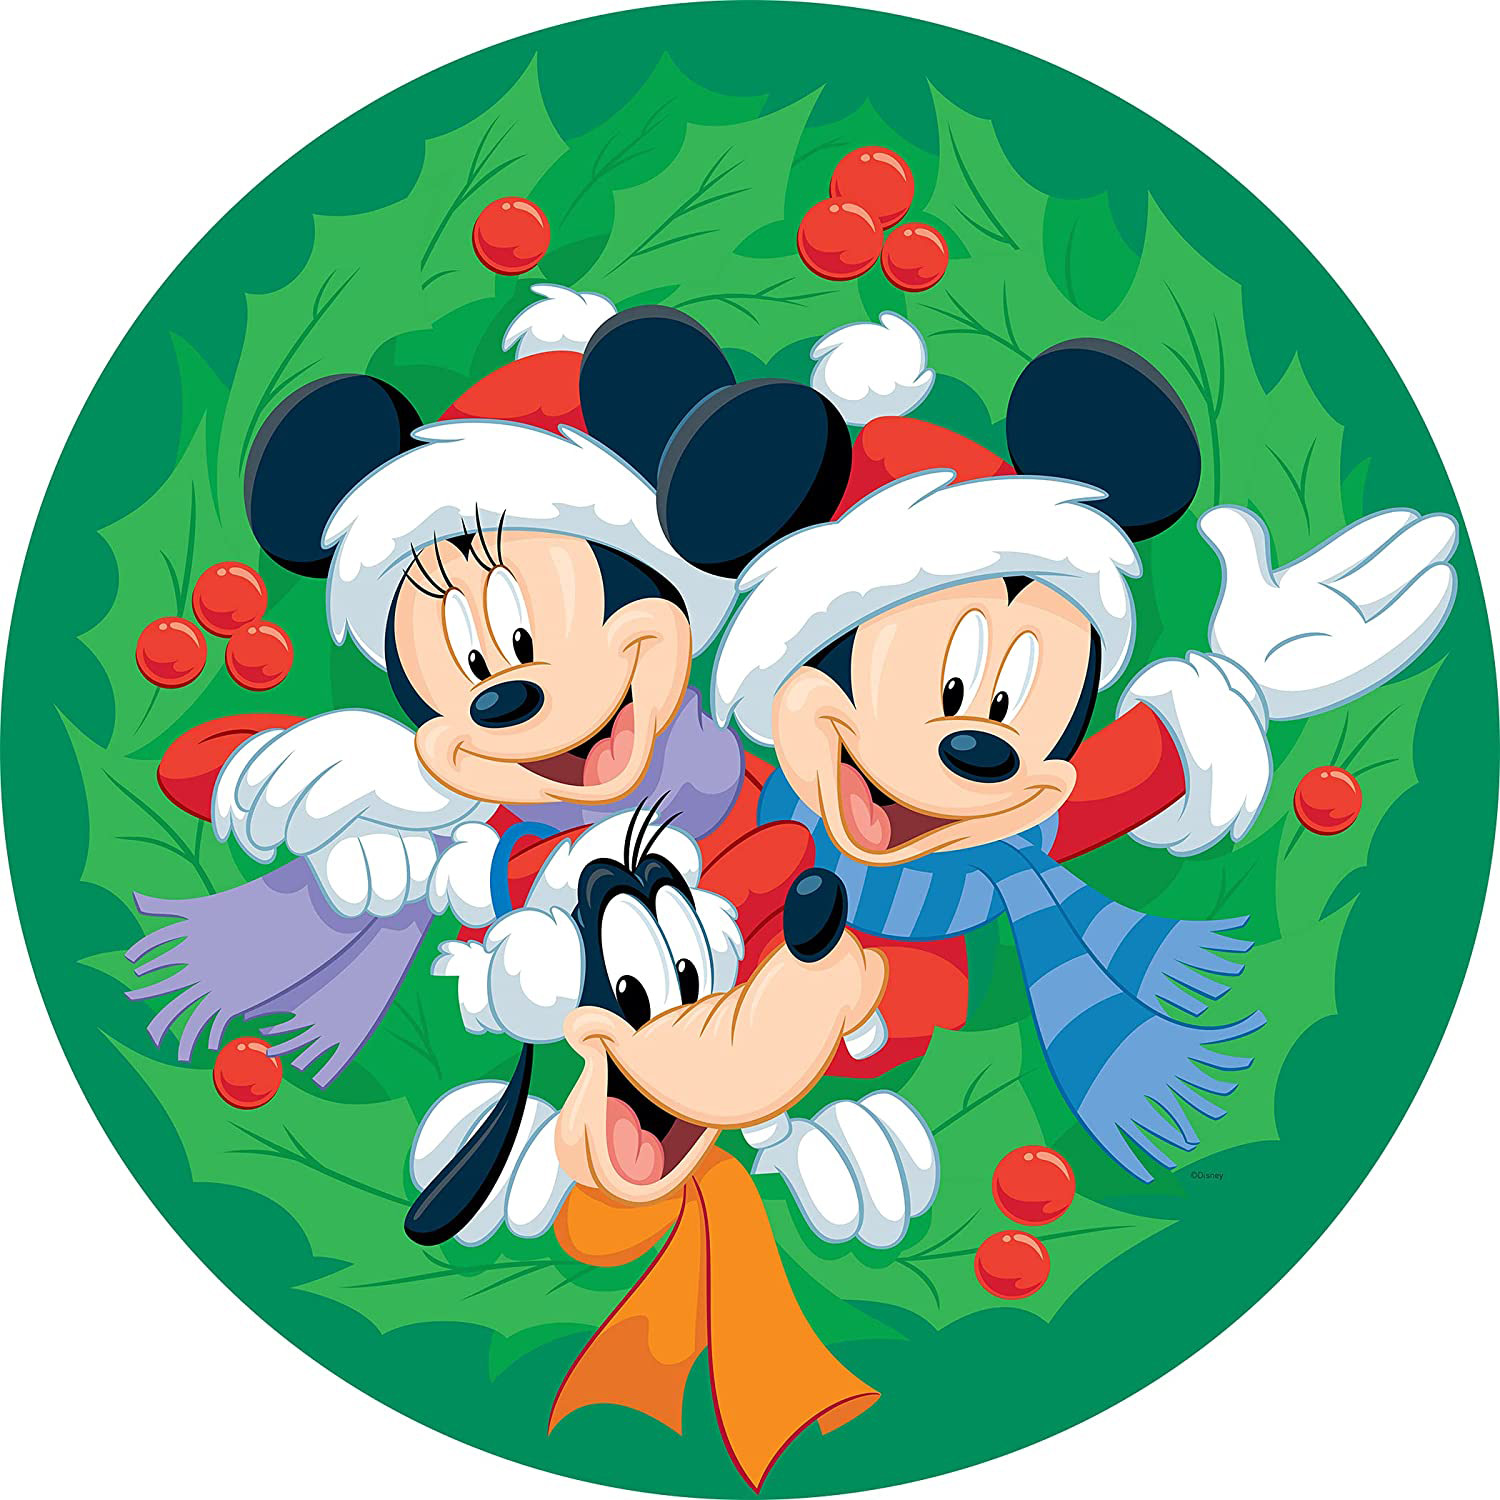 Disney Holiday Fun 5 in 1 Multipack Puzzle Set